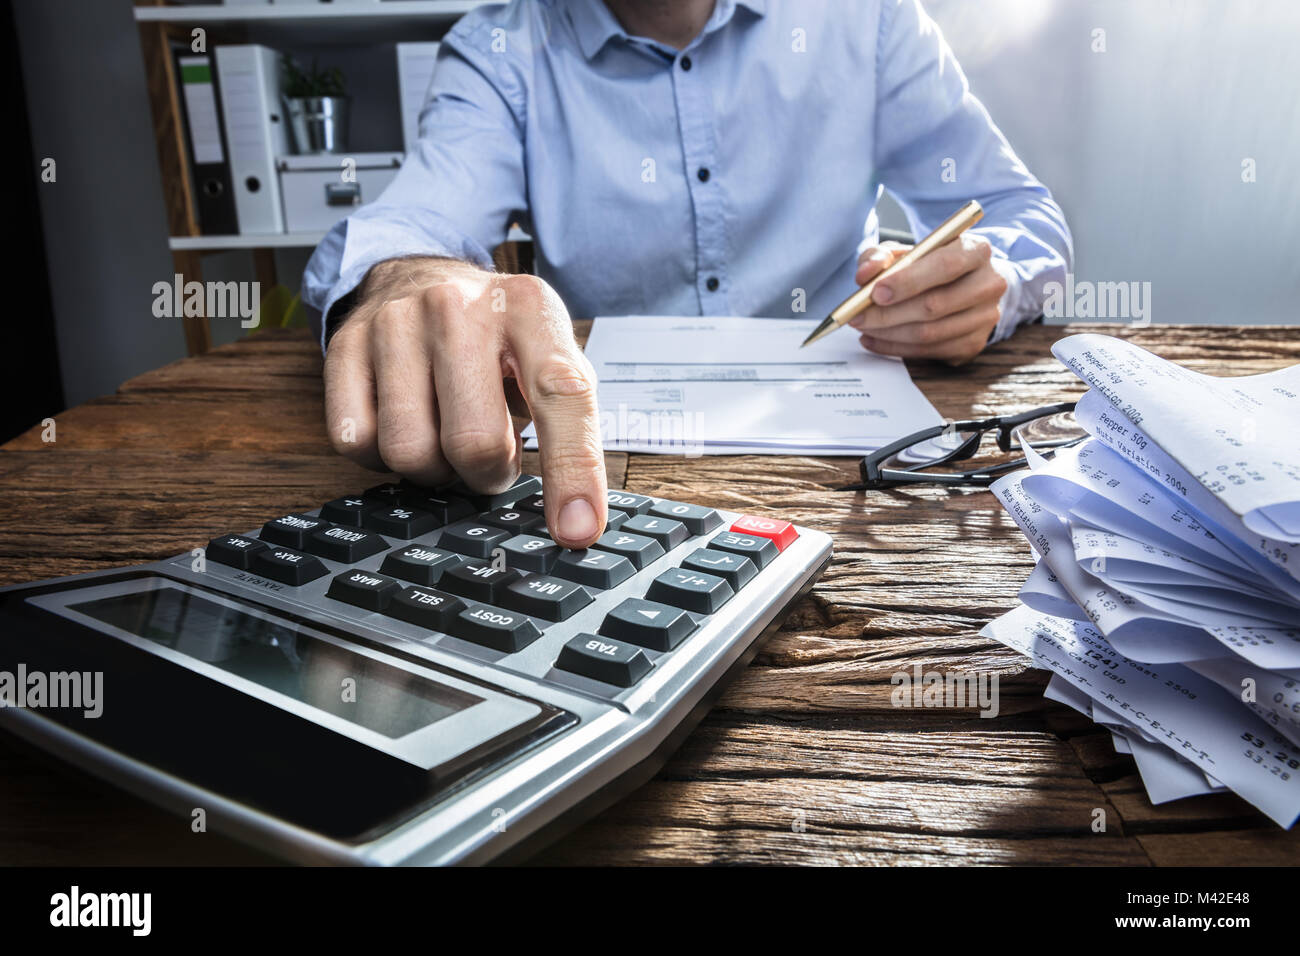 Close-up Of A Businessperson's Hand Calculating Invoice With Calculator At Workplace Stock Photo